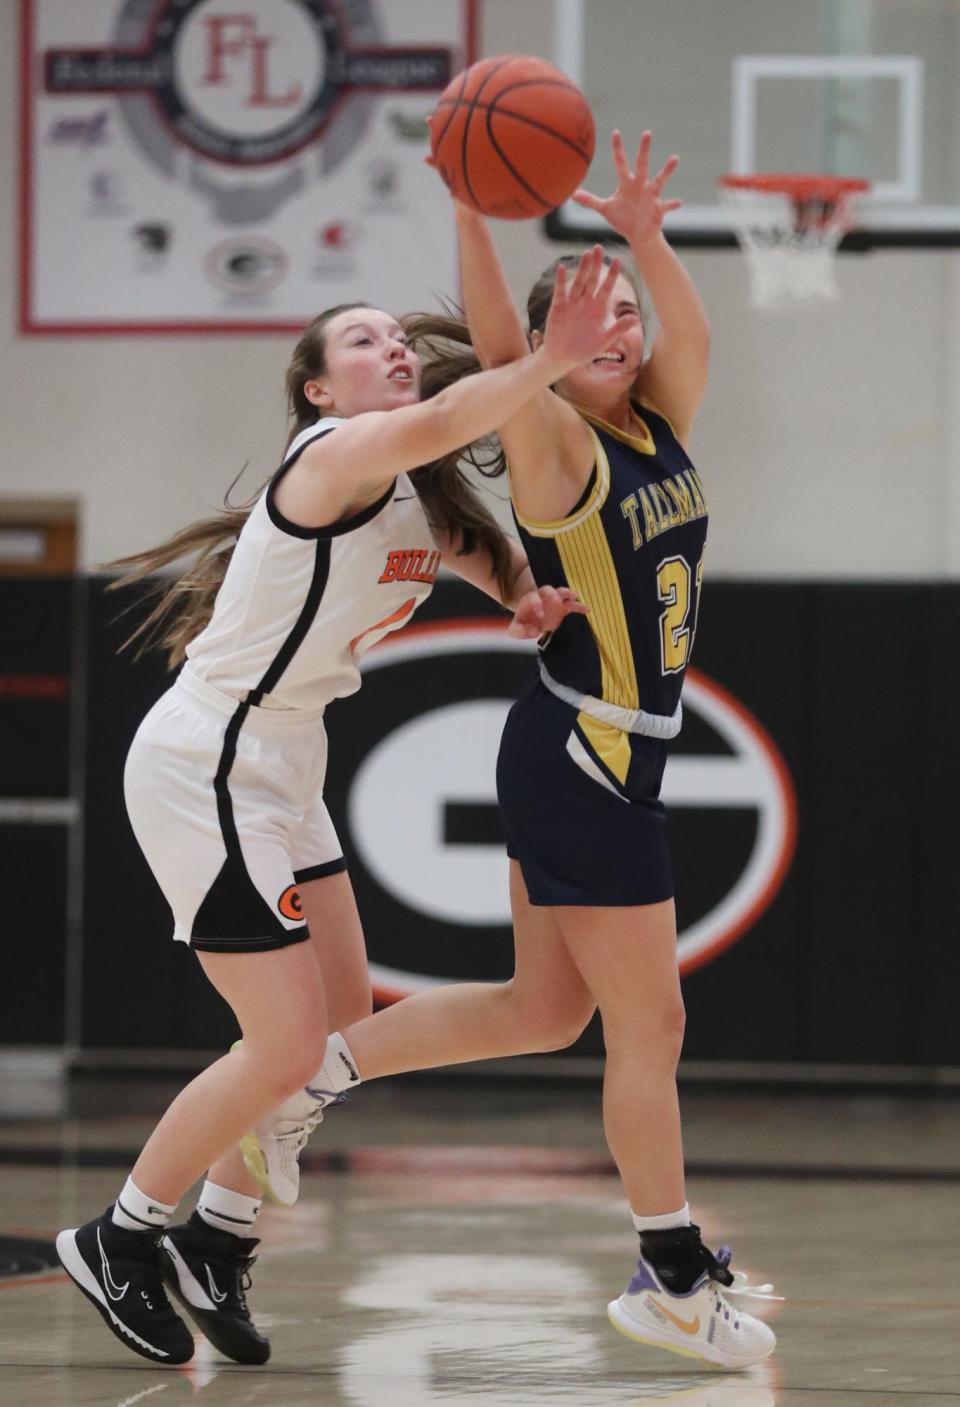 Green's Madi Pukansky tries to steal a pass as Tallmadge's Mia Zappola catches the ball in the first half Wednesday night at Green High School. Green won 72-28. [Mike Cardew/Akron Beacon Journal]